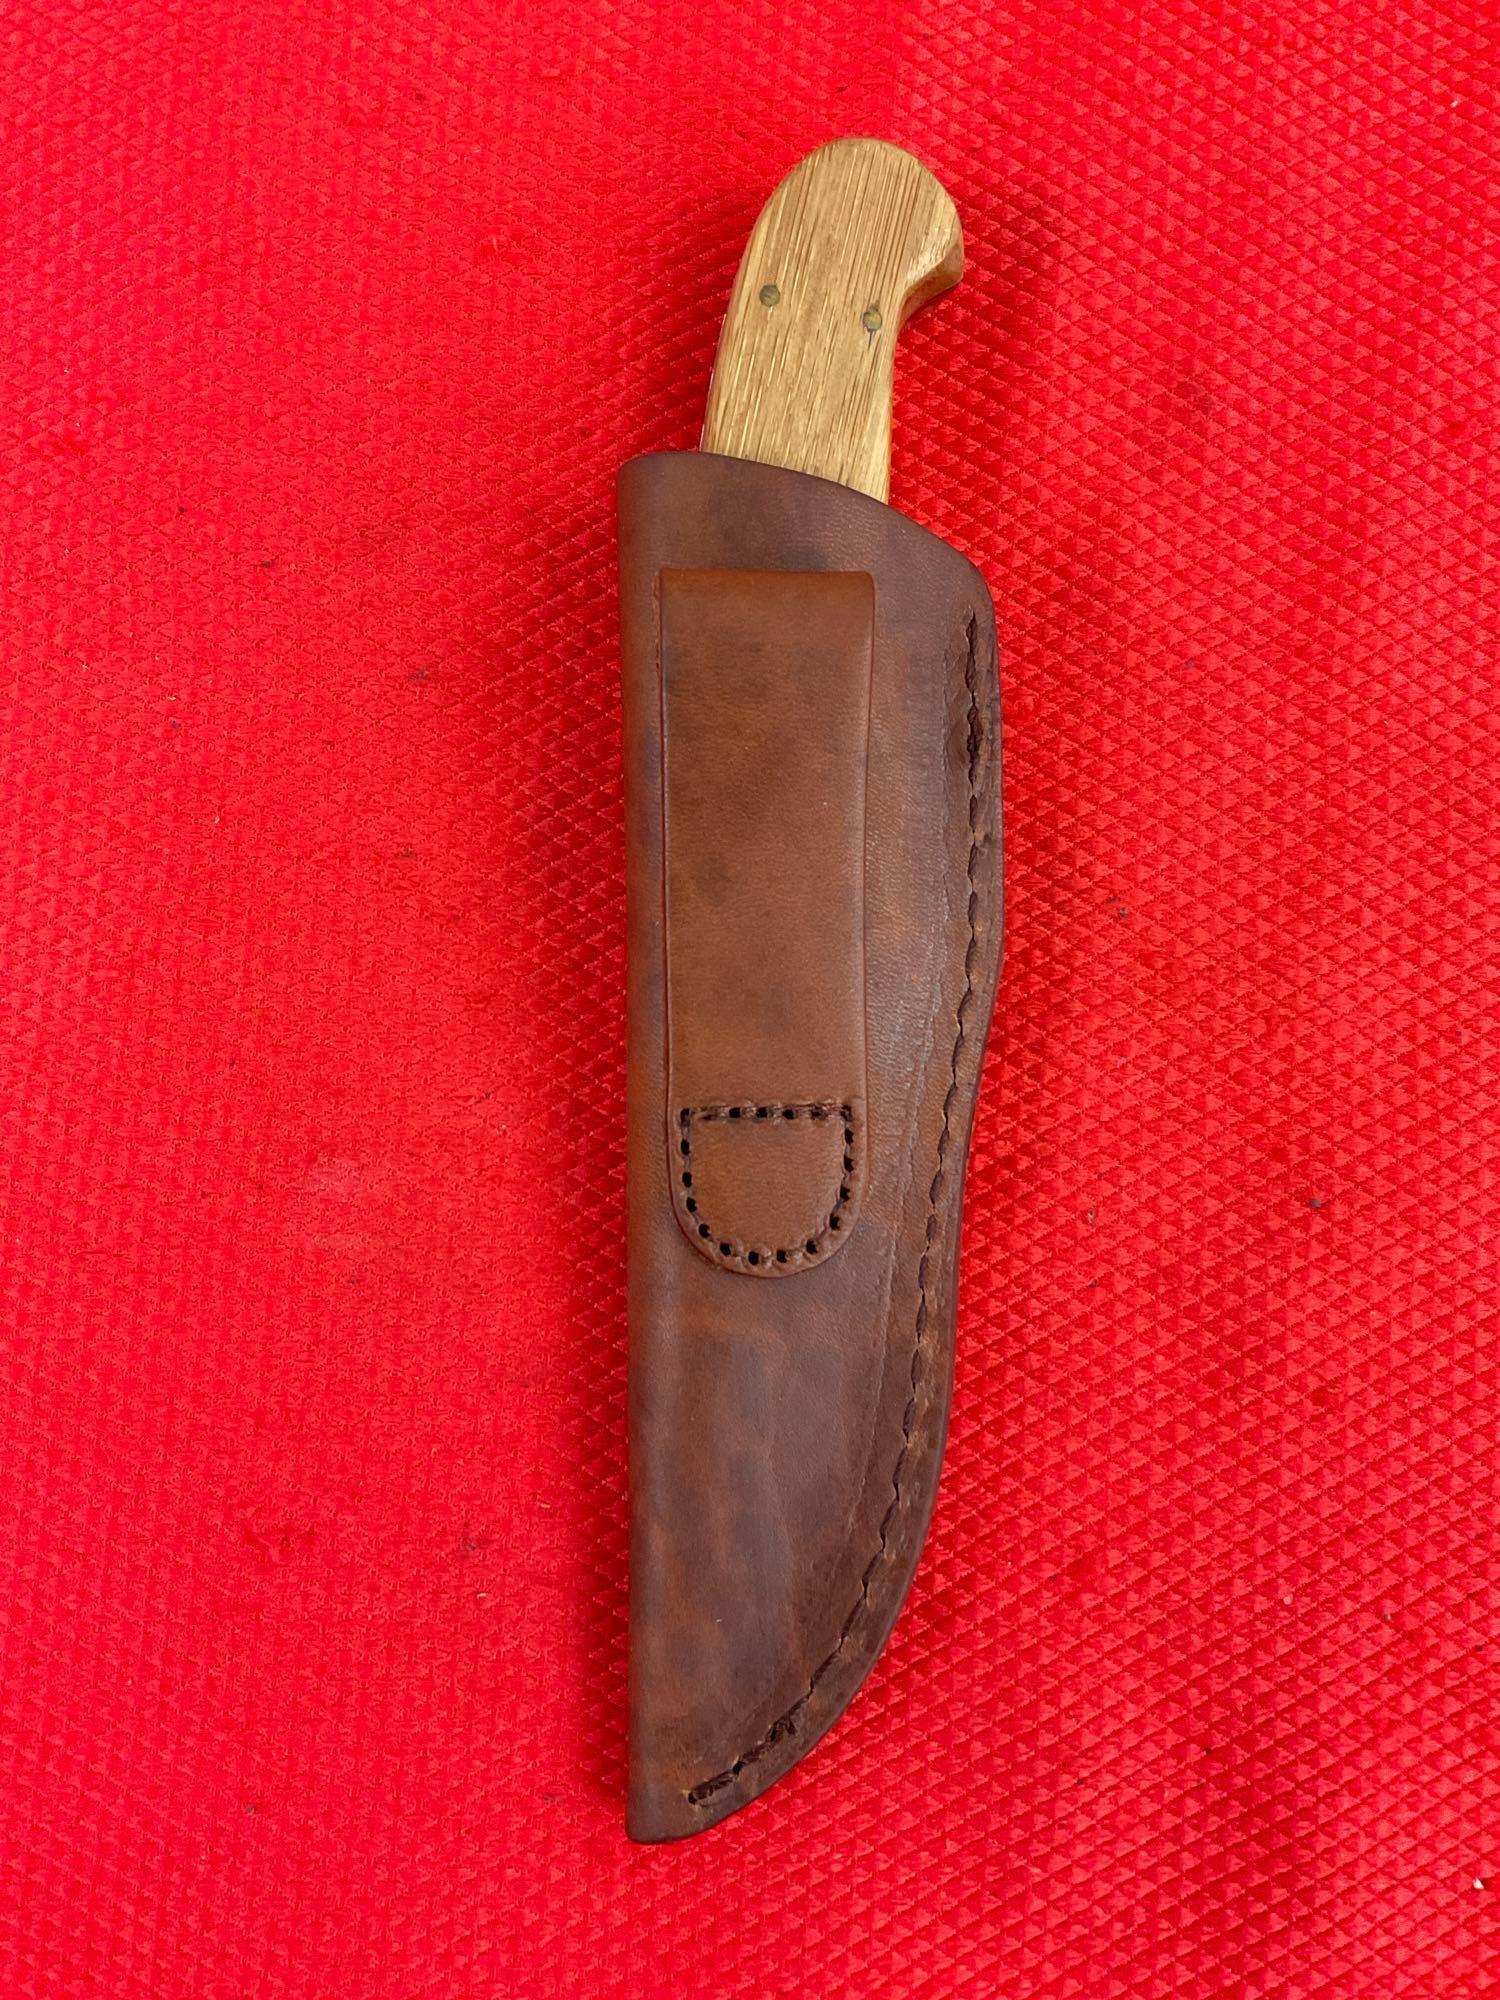 3" Steel Fixed Blade Hunting Knife w/ Wood Handle, Etched Blade & Sheath. Unknown Maker. See pics.